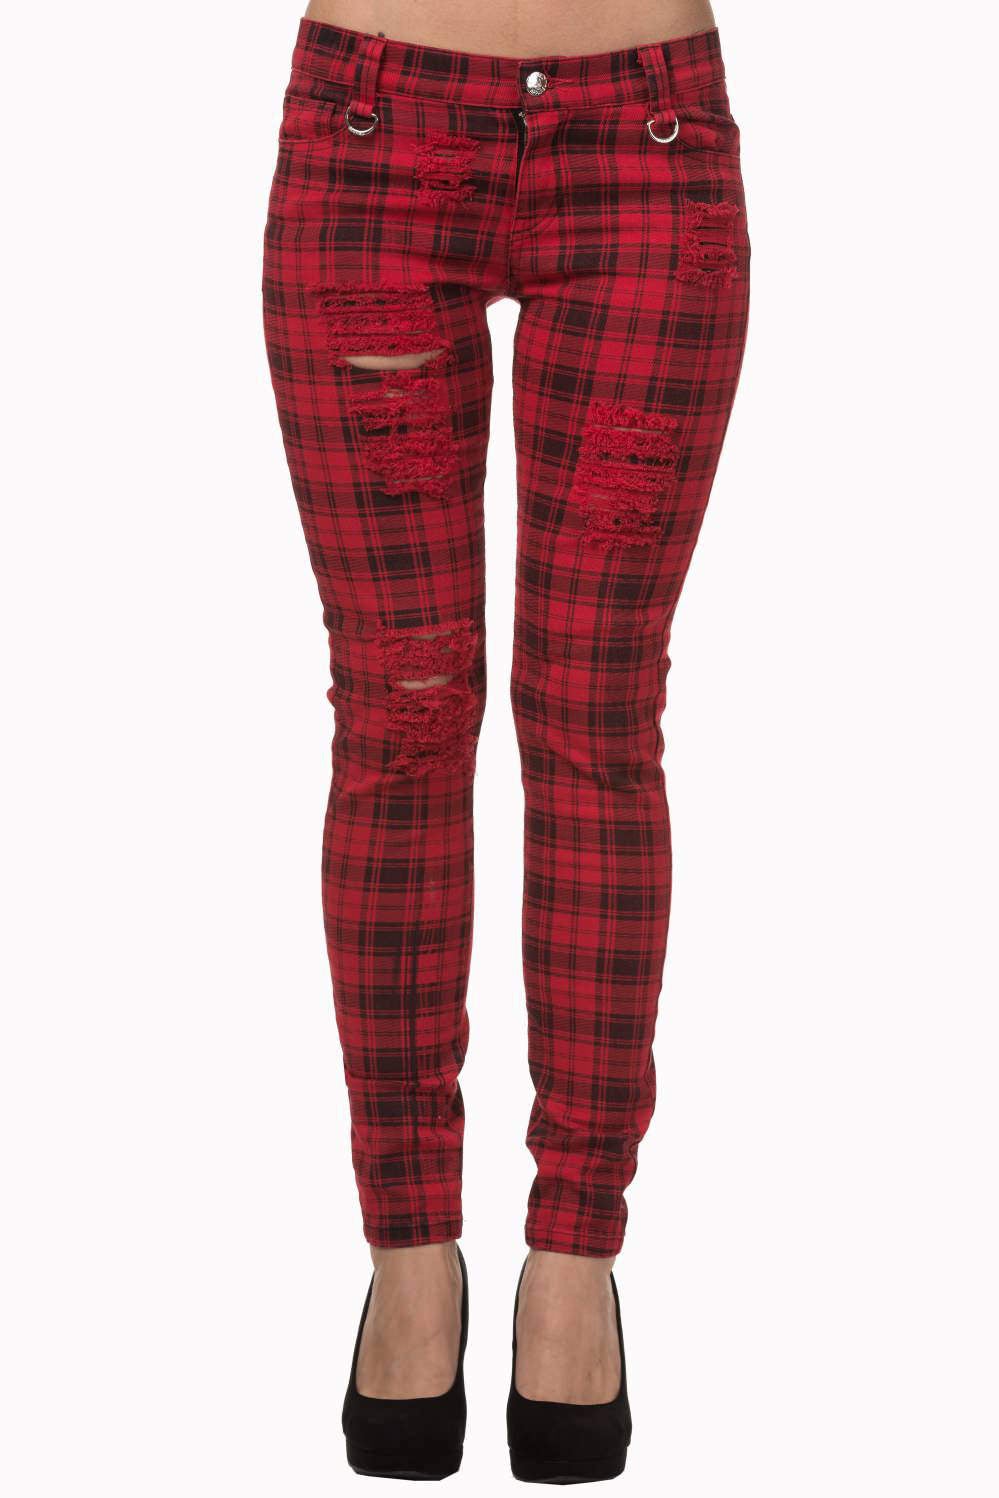 Red tartan check trousers low rise with rips. 